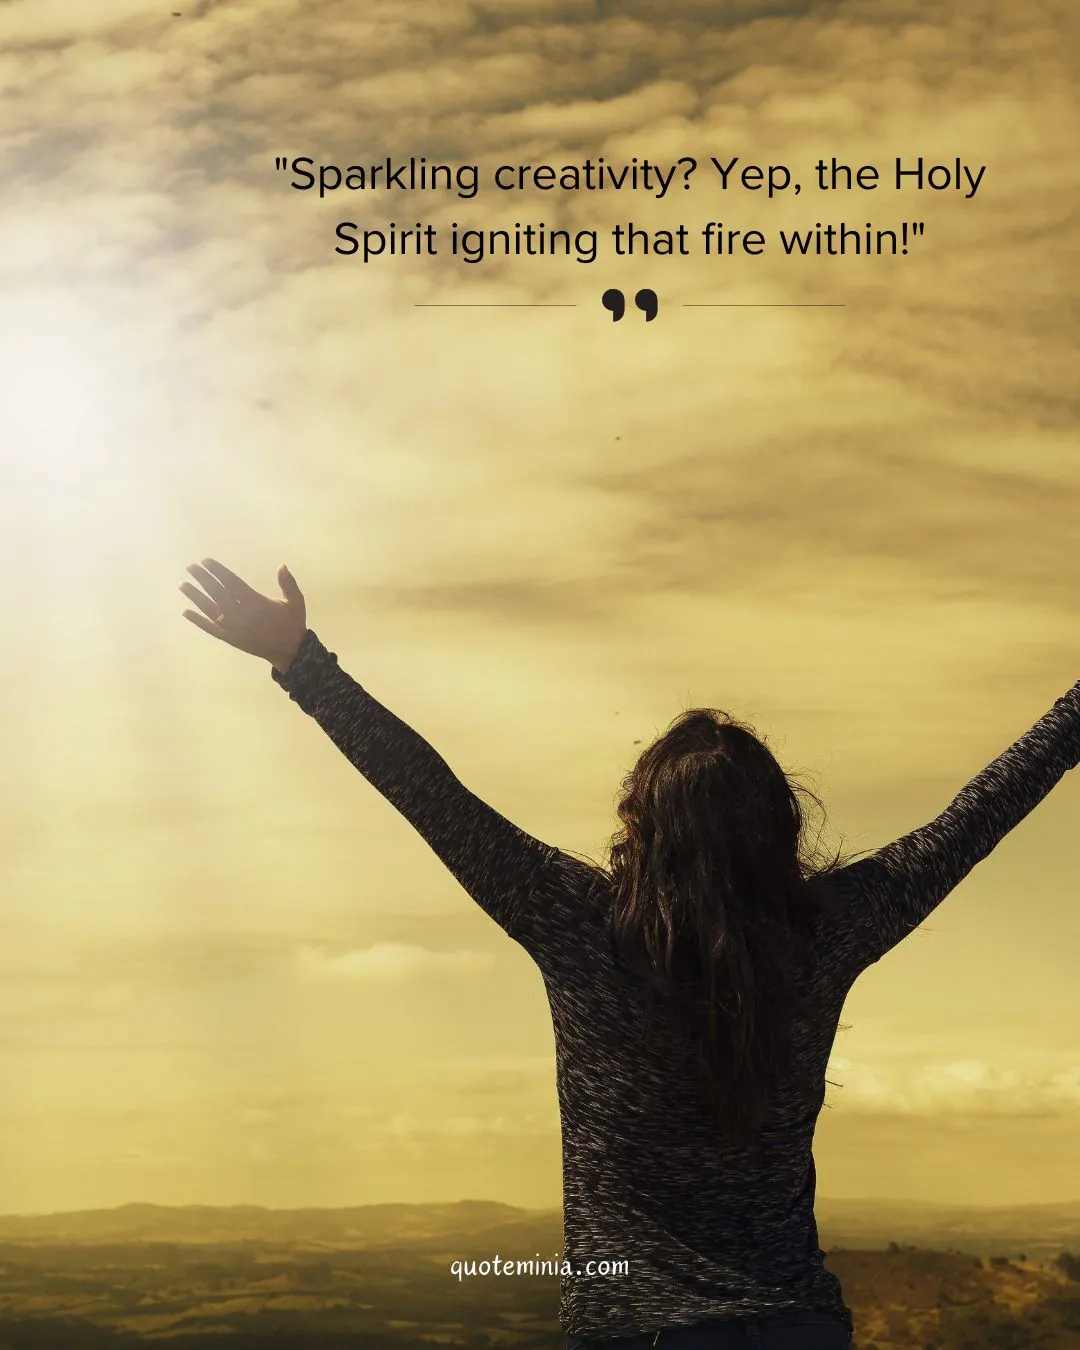 Quotes About The Holy Spirit image 1